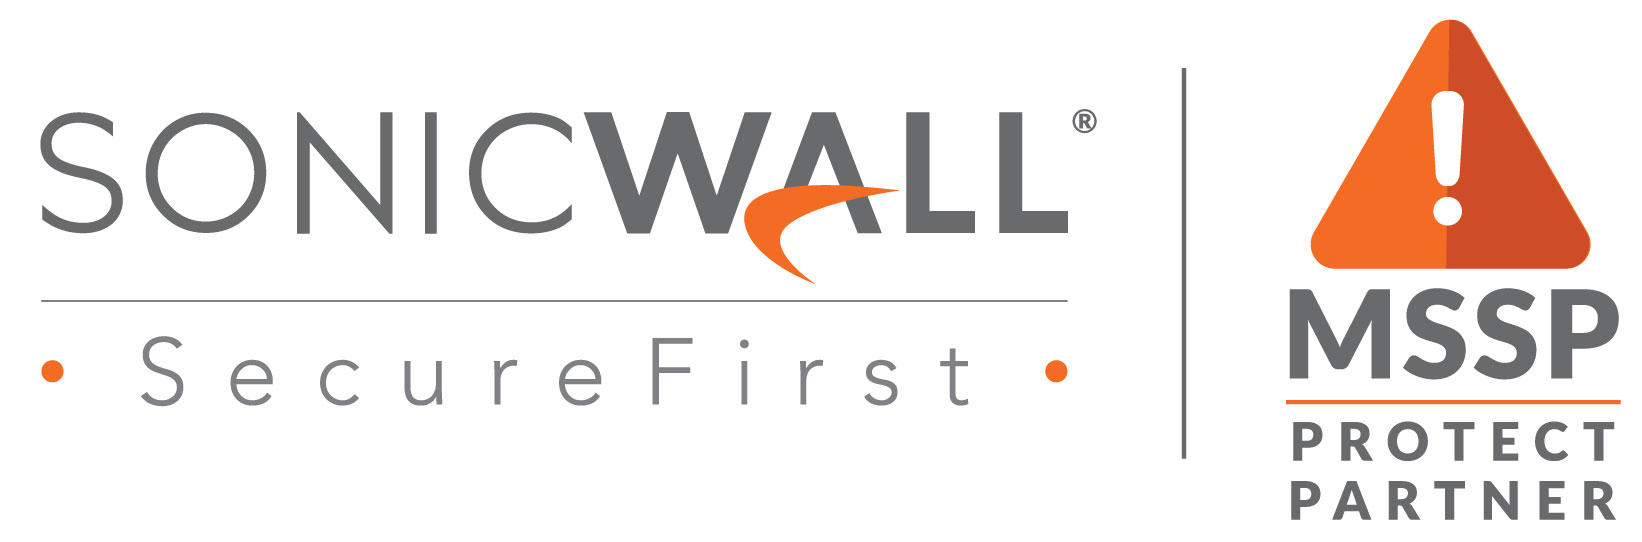 Sonicwall Securefirst MSSP Protect Partner Log in white, gray, orange